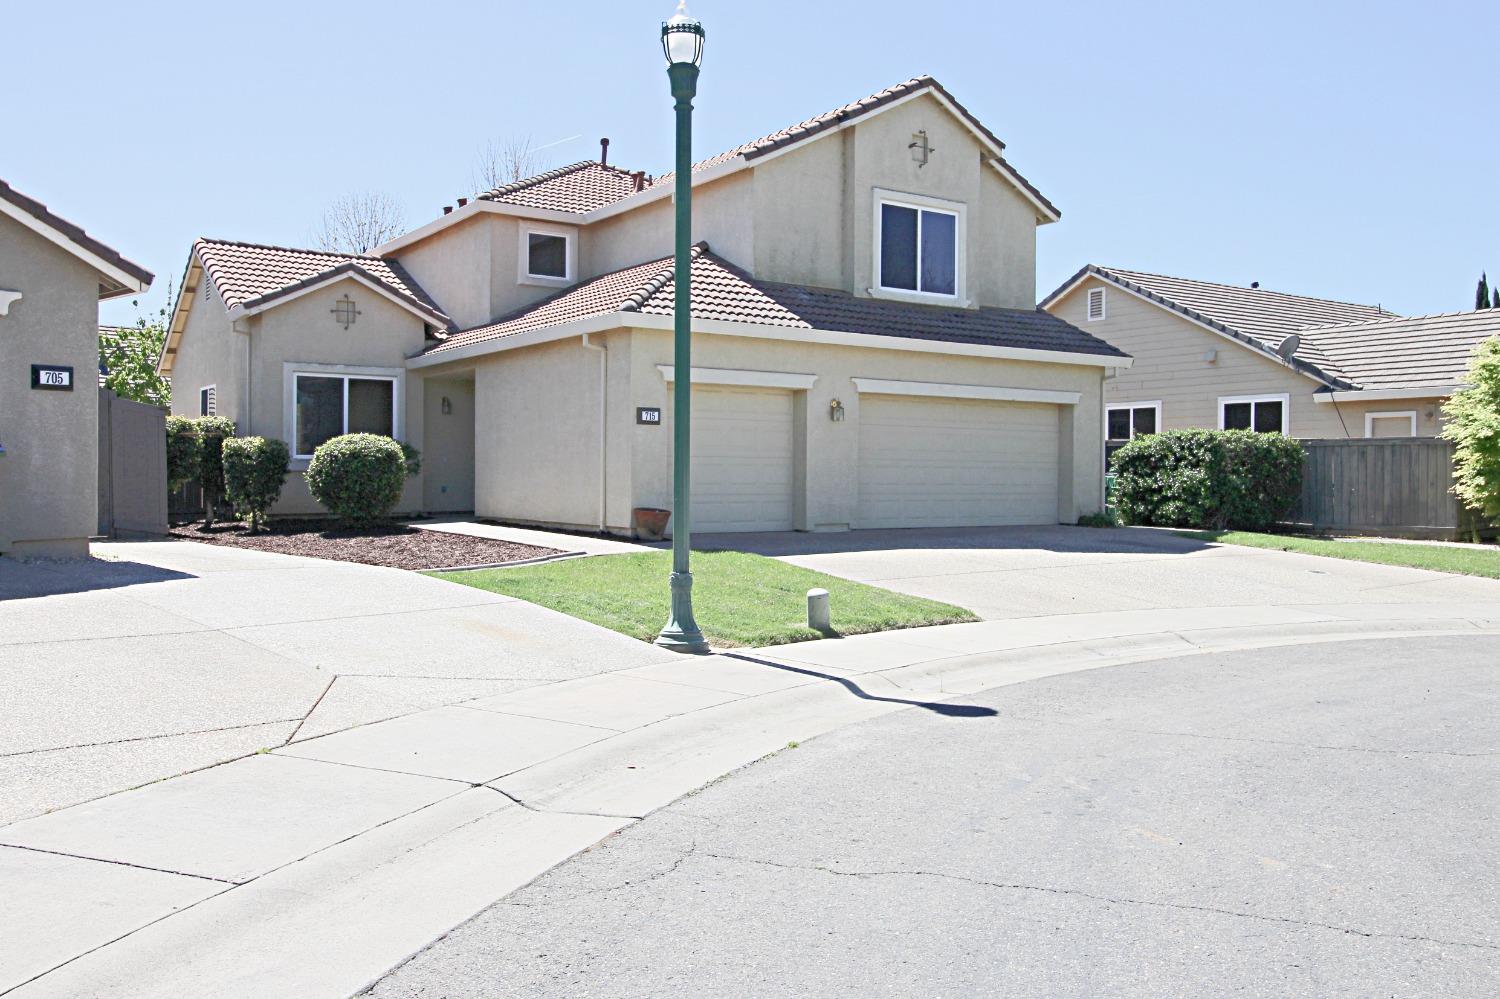 Photo of 715 Flyway Ct in Gridley, CA